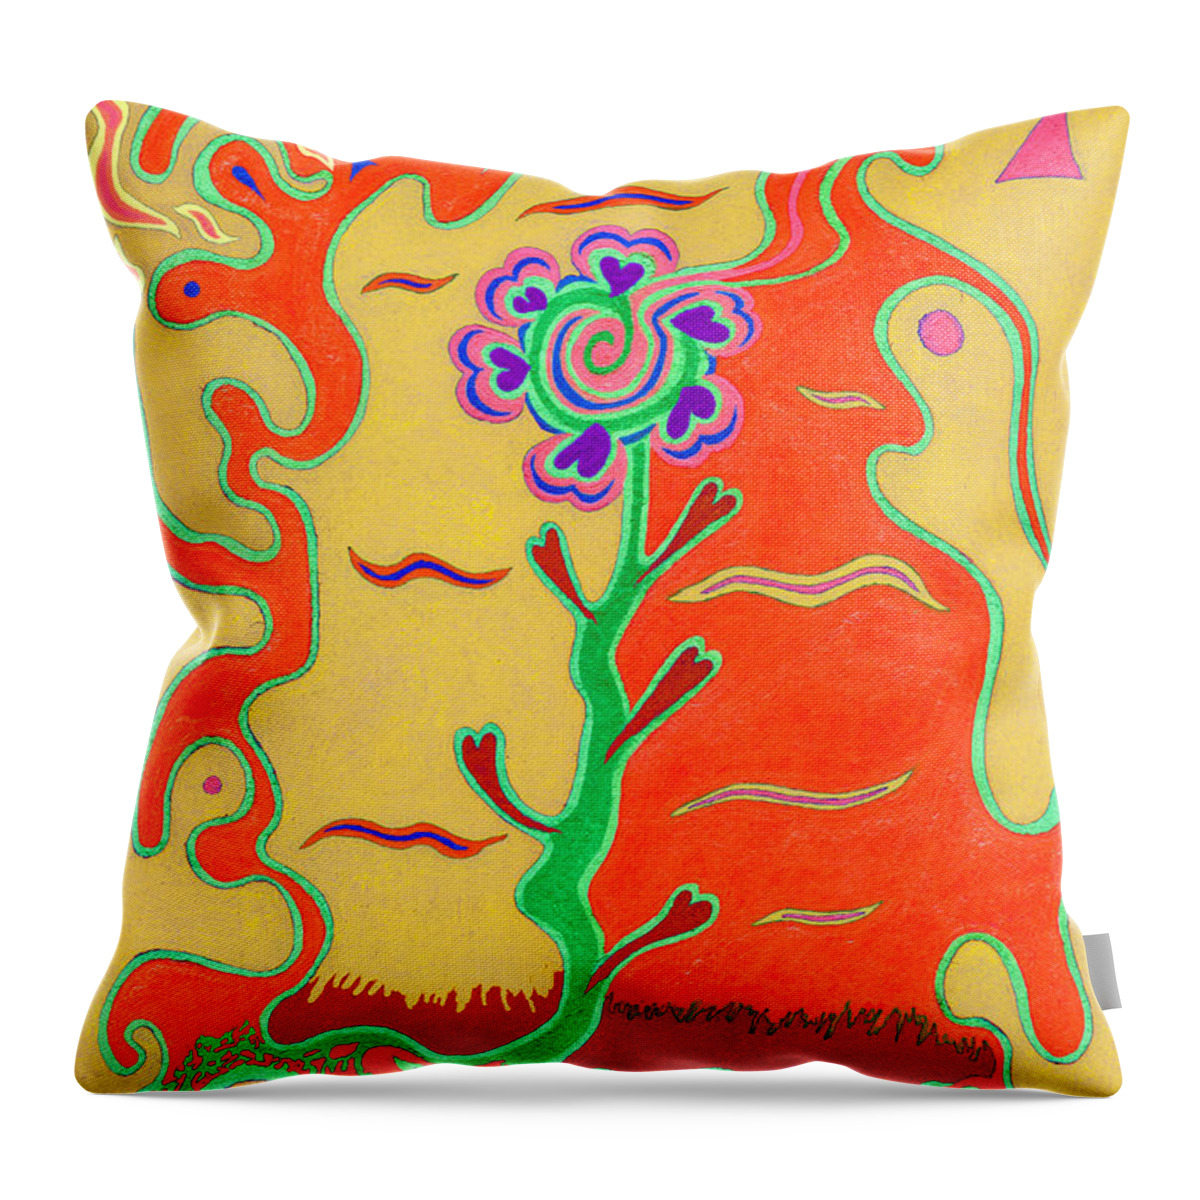 Day's Passion Throw Pillow featuring the photograph Day's Passion V18 by Kenneth James